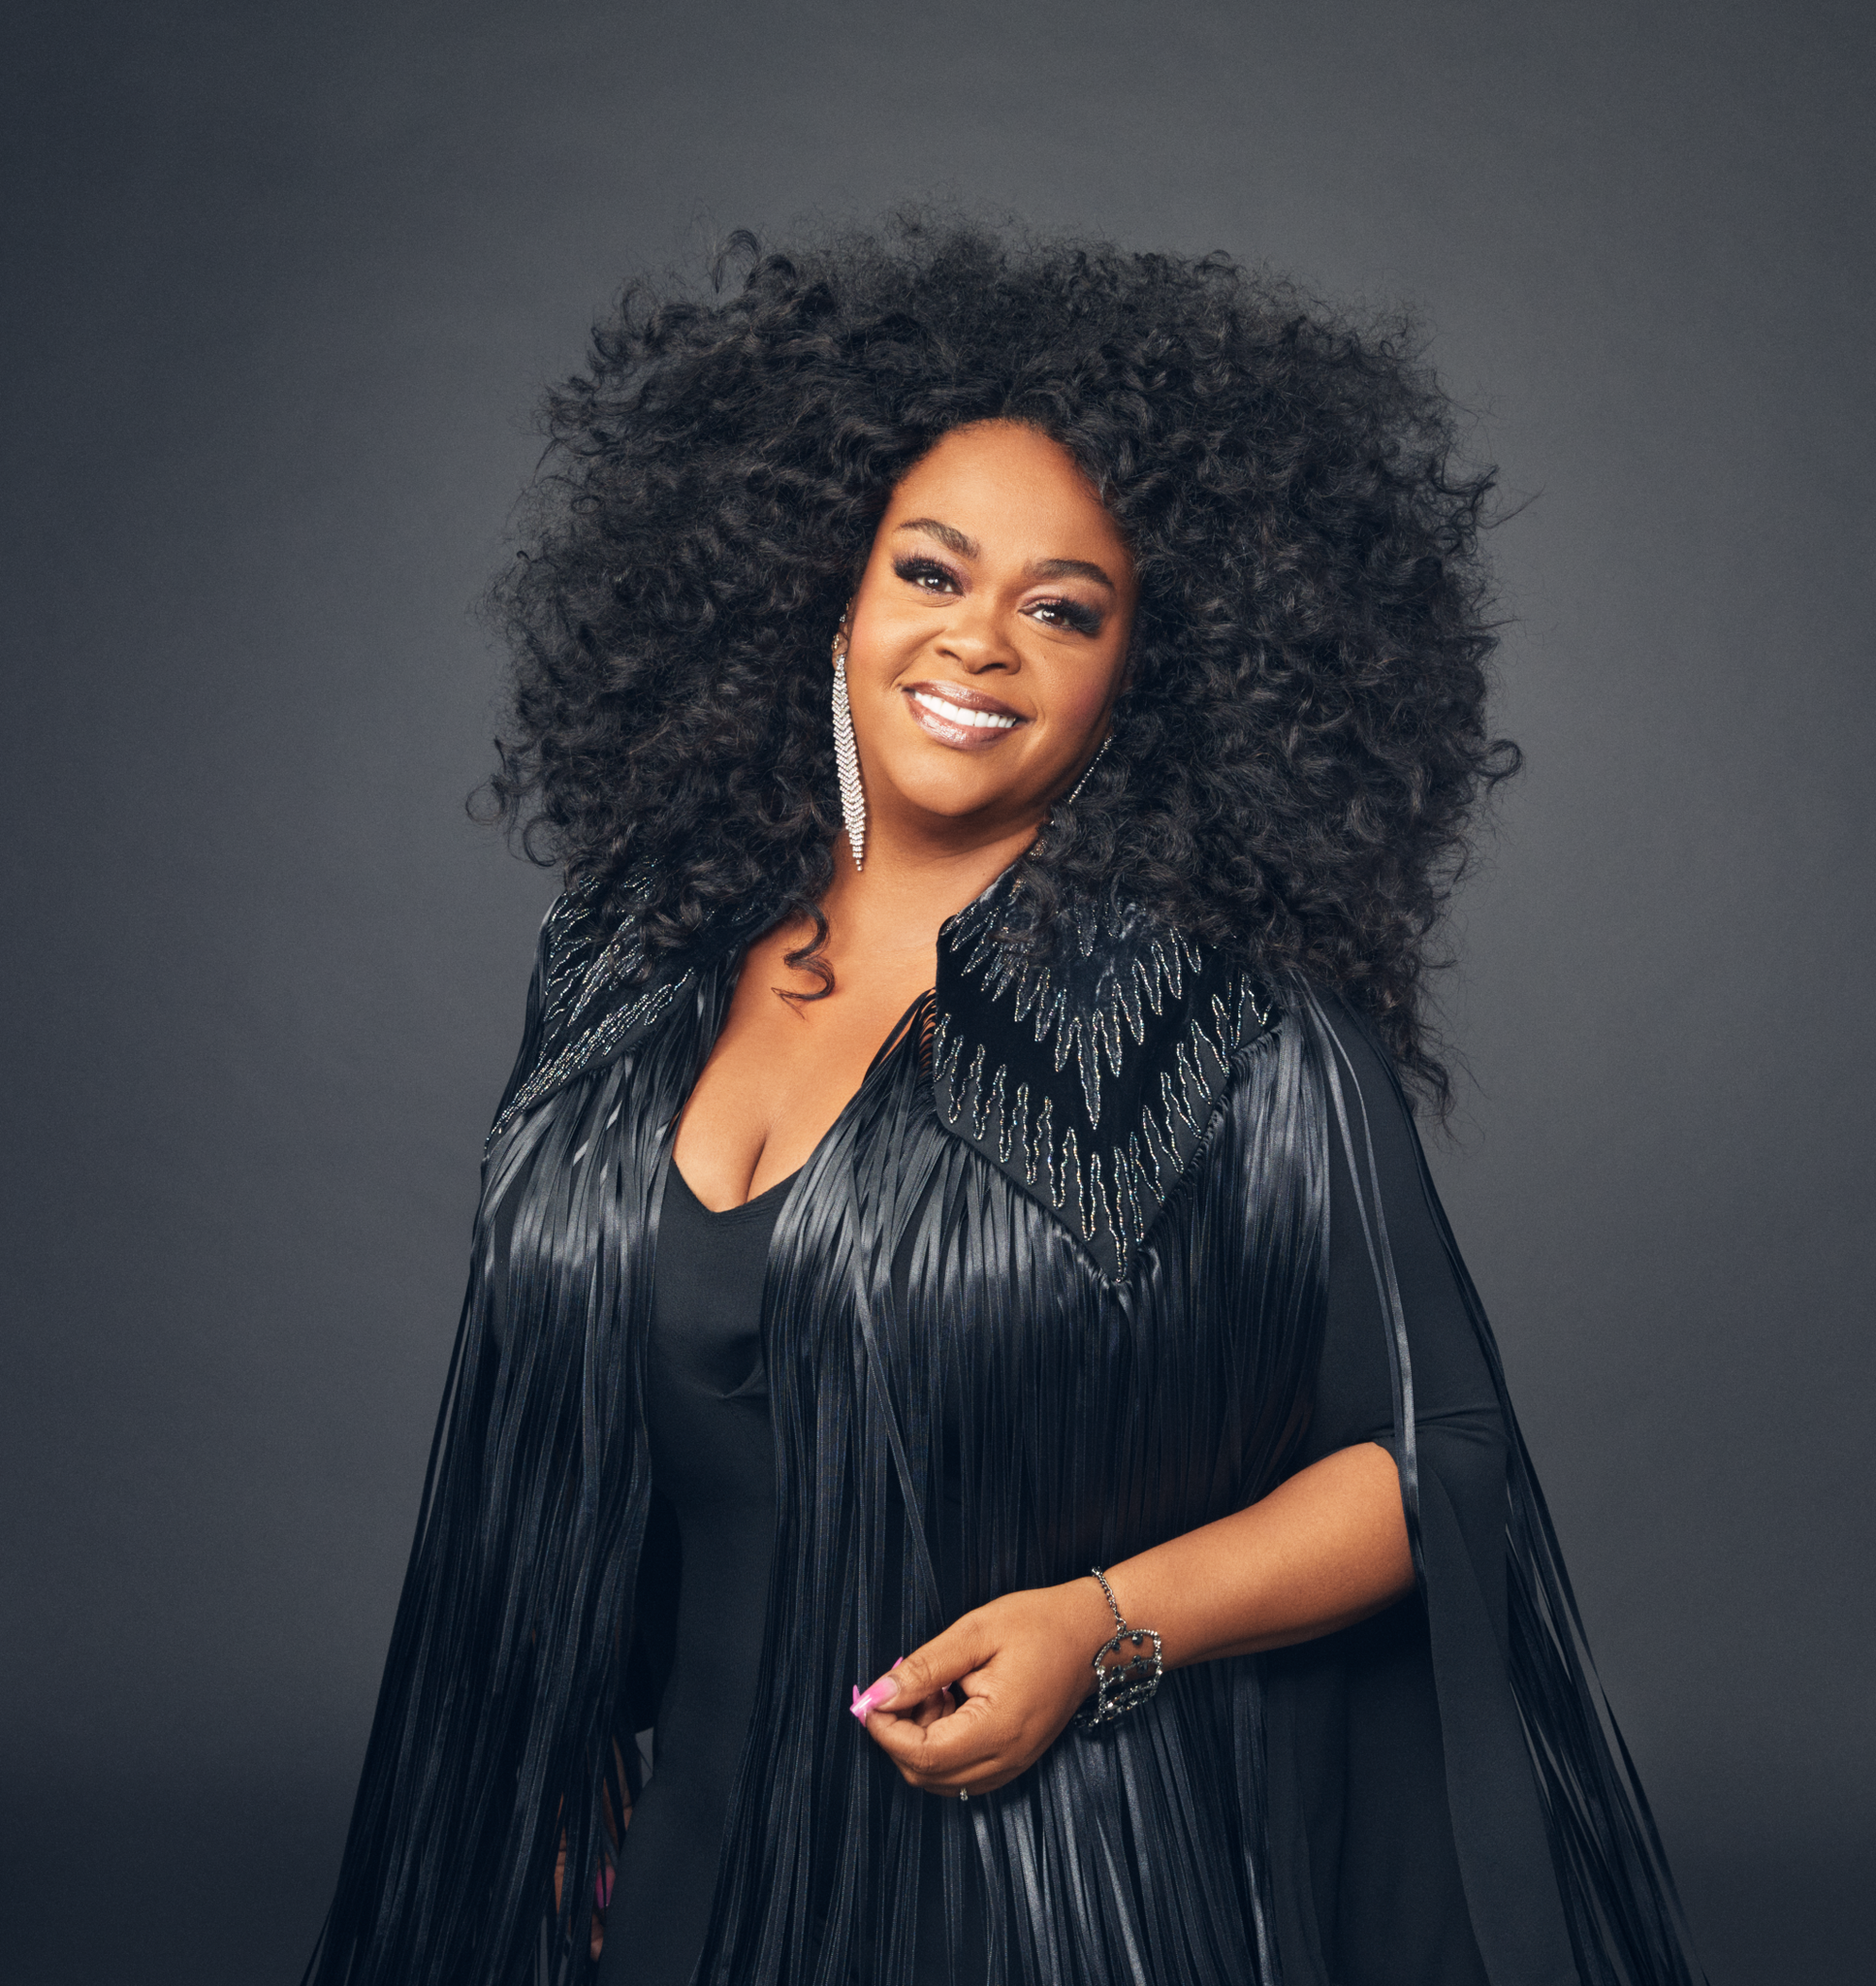 Jill Scott Hopes To Brings Peace And Pause To Dark Times With ‘Highway To Heaven’